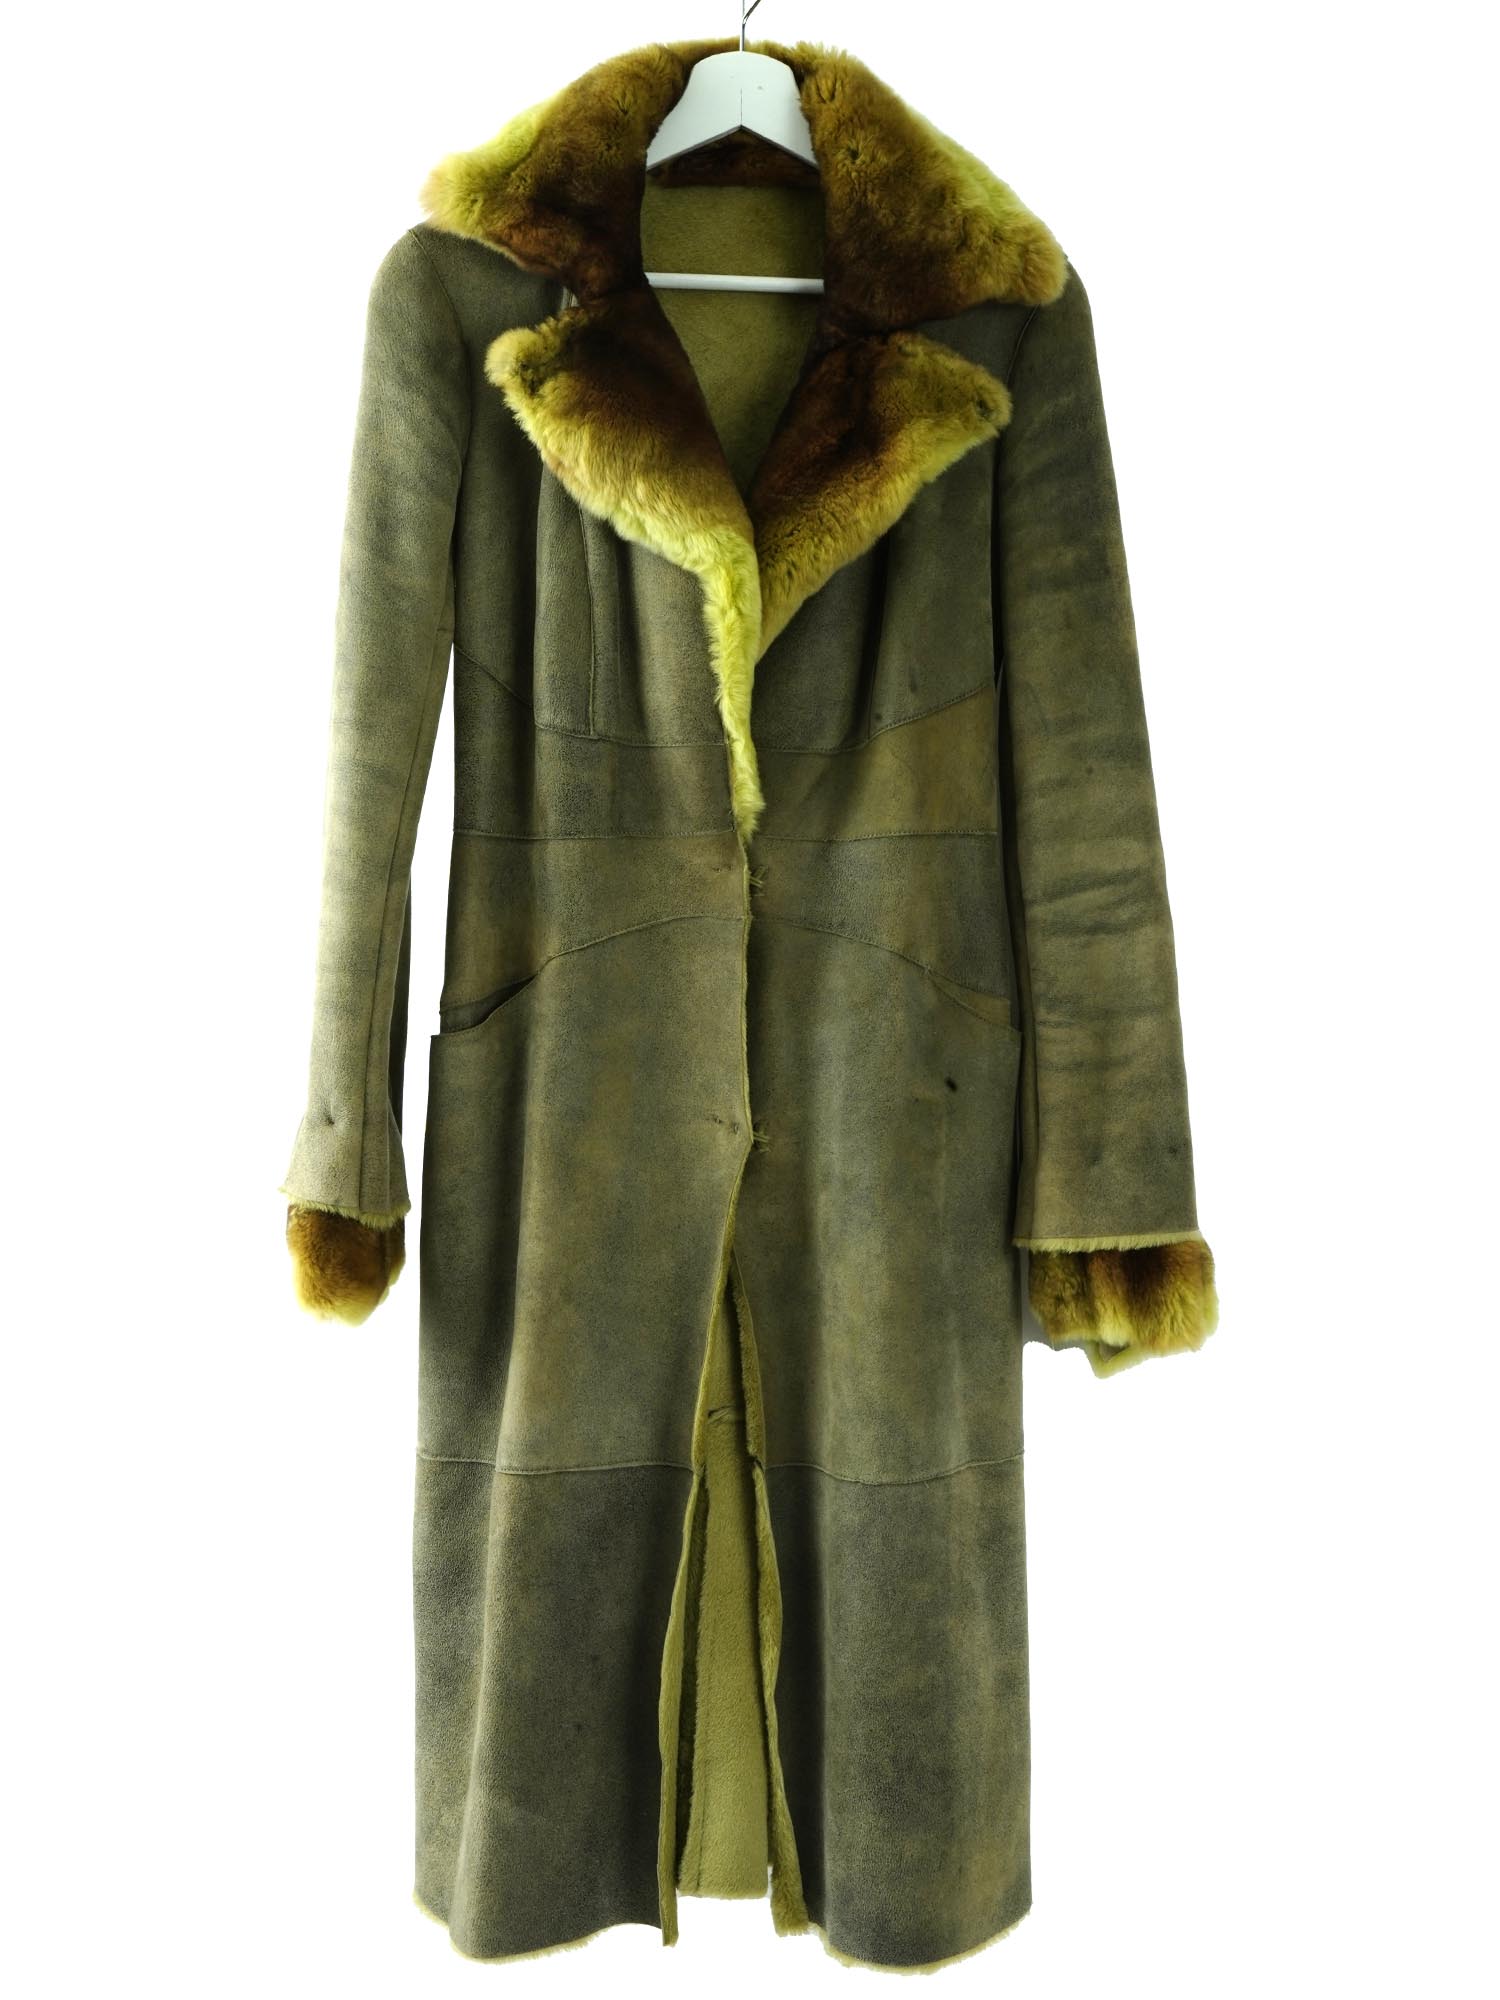 ERMANNO SCERVINO SHEARLING AND ORYLAG FUR COAT PIC-0